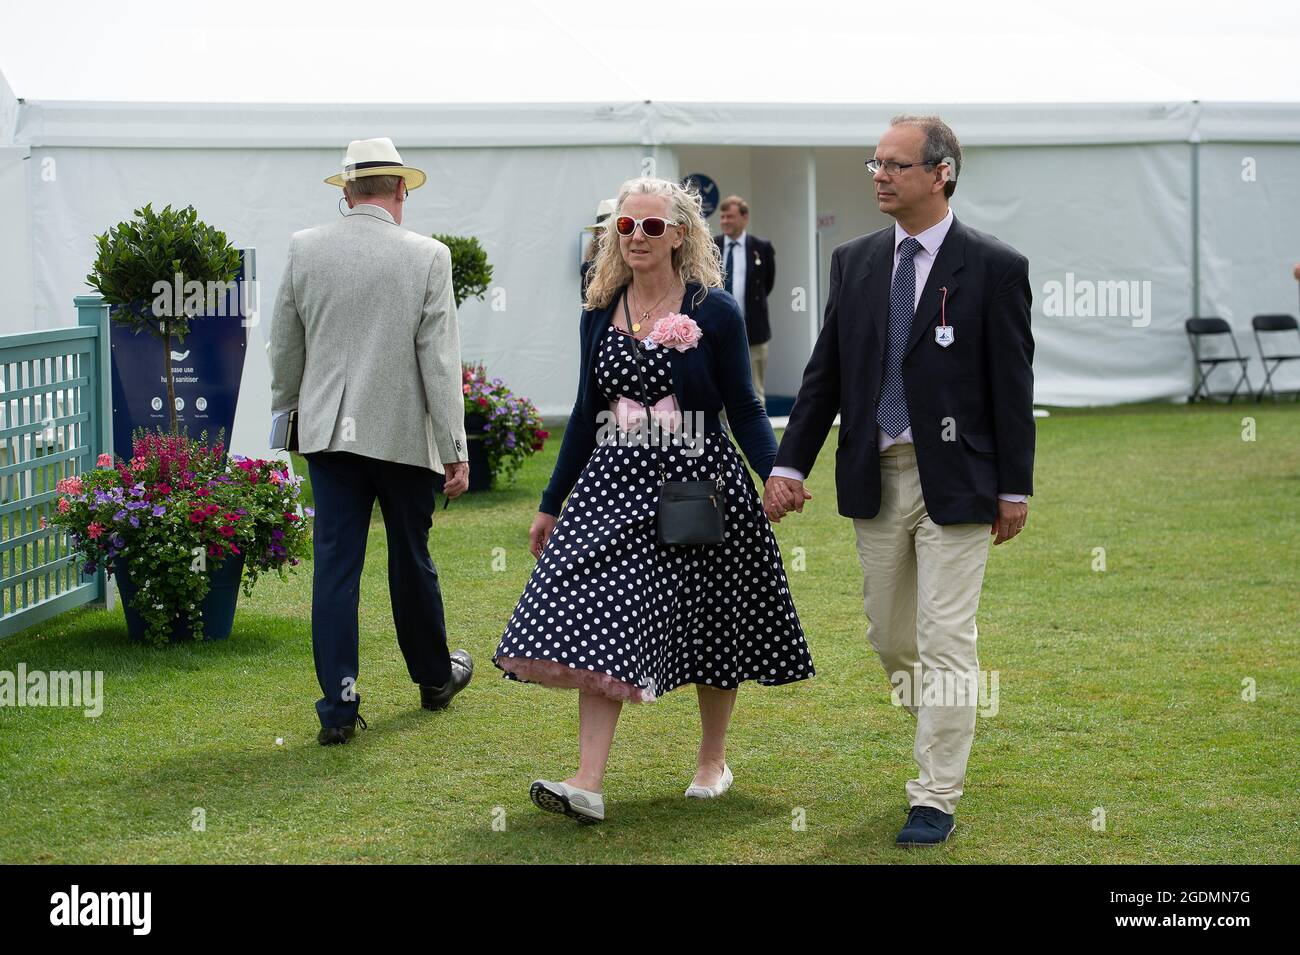 Henley, Oxfordshire, UK. 14th August, 2021. It was another busy day as  guests at Henley Royal Regatta enjoyed watching the rowing. The Dress Code  has been relaxed this year to allow ladies